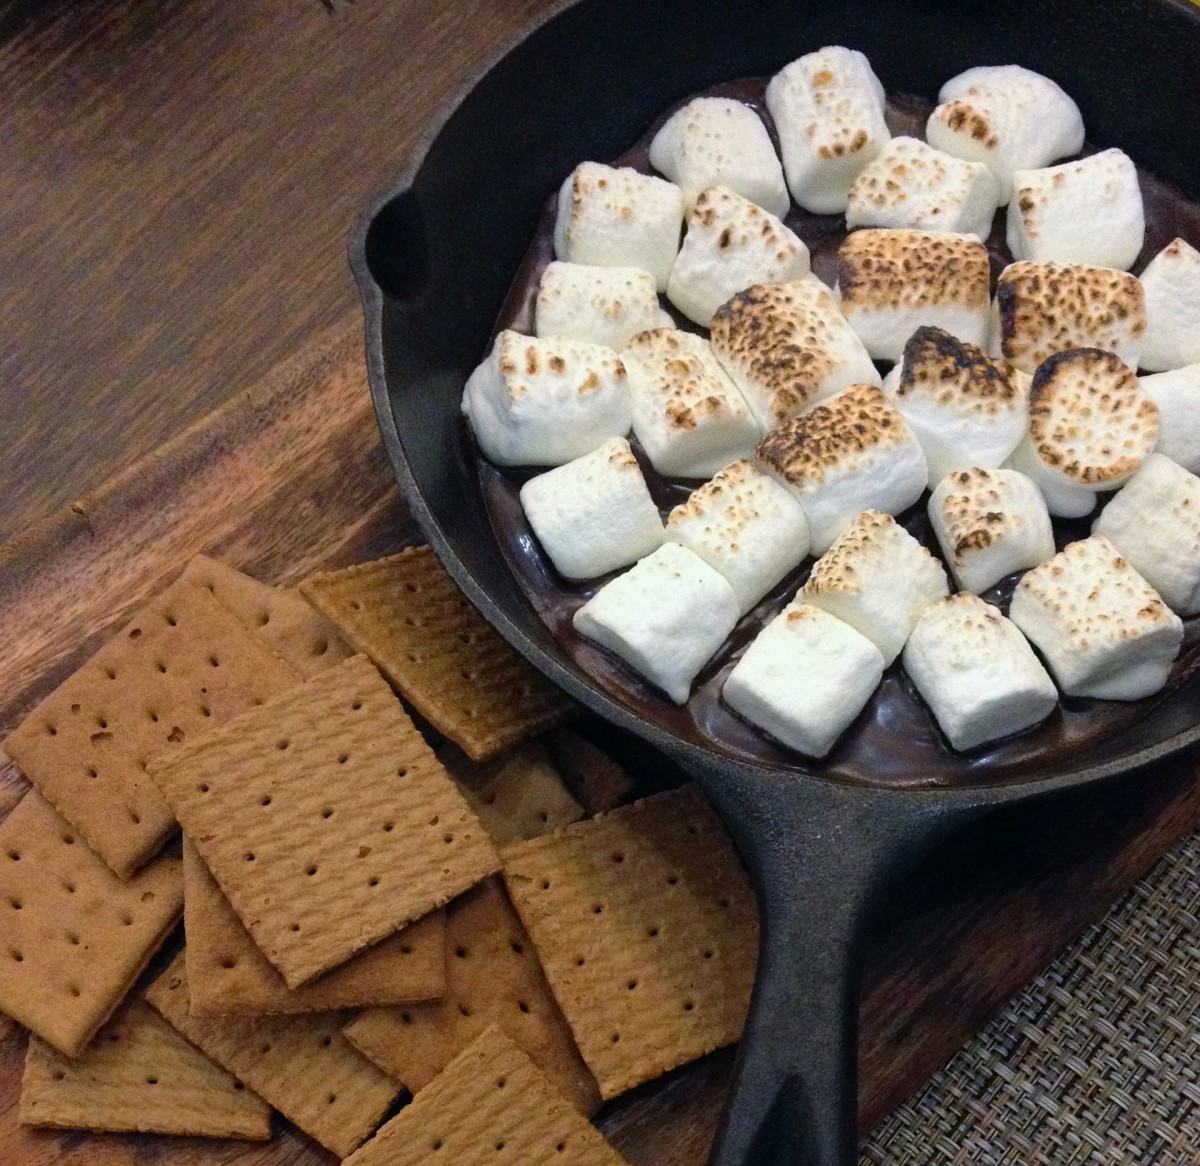 How Many Ways Can You Make S'mores?